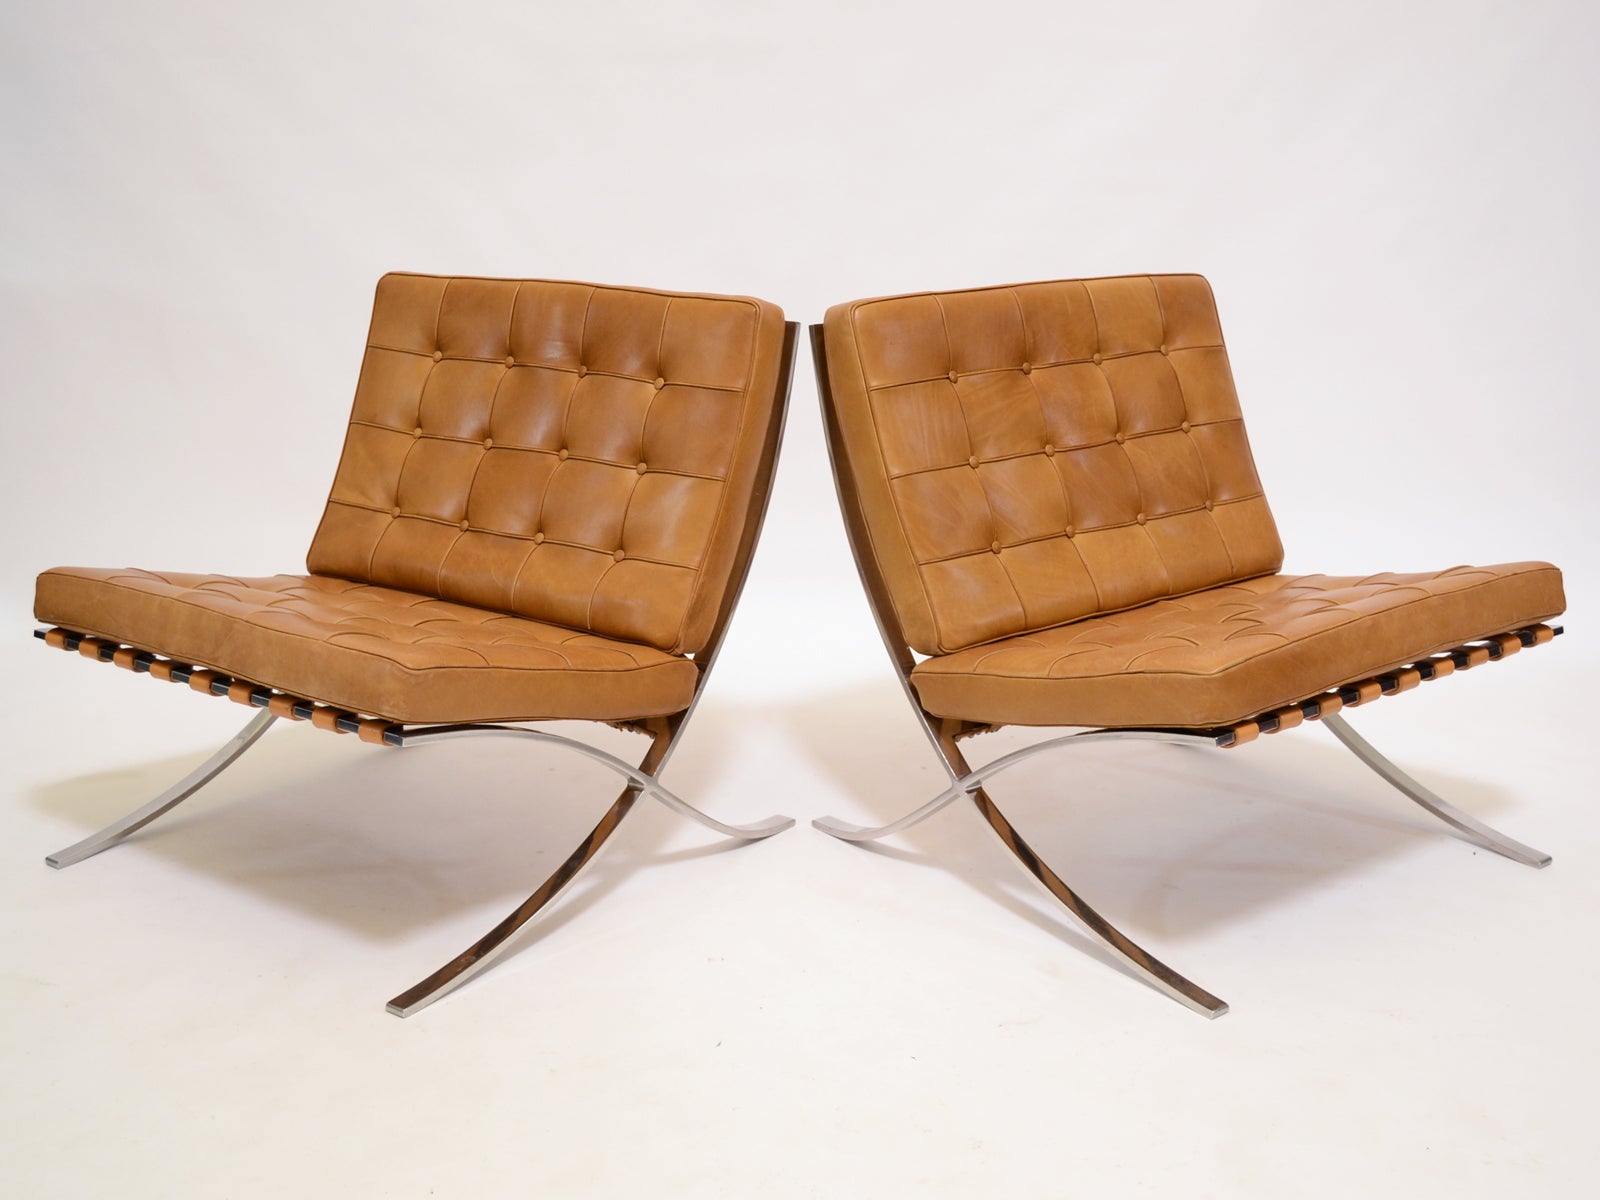 Pair of Ludwig Mies van der Rohe Barcelona chairs by Knoll